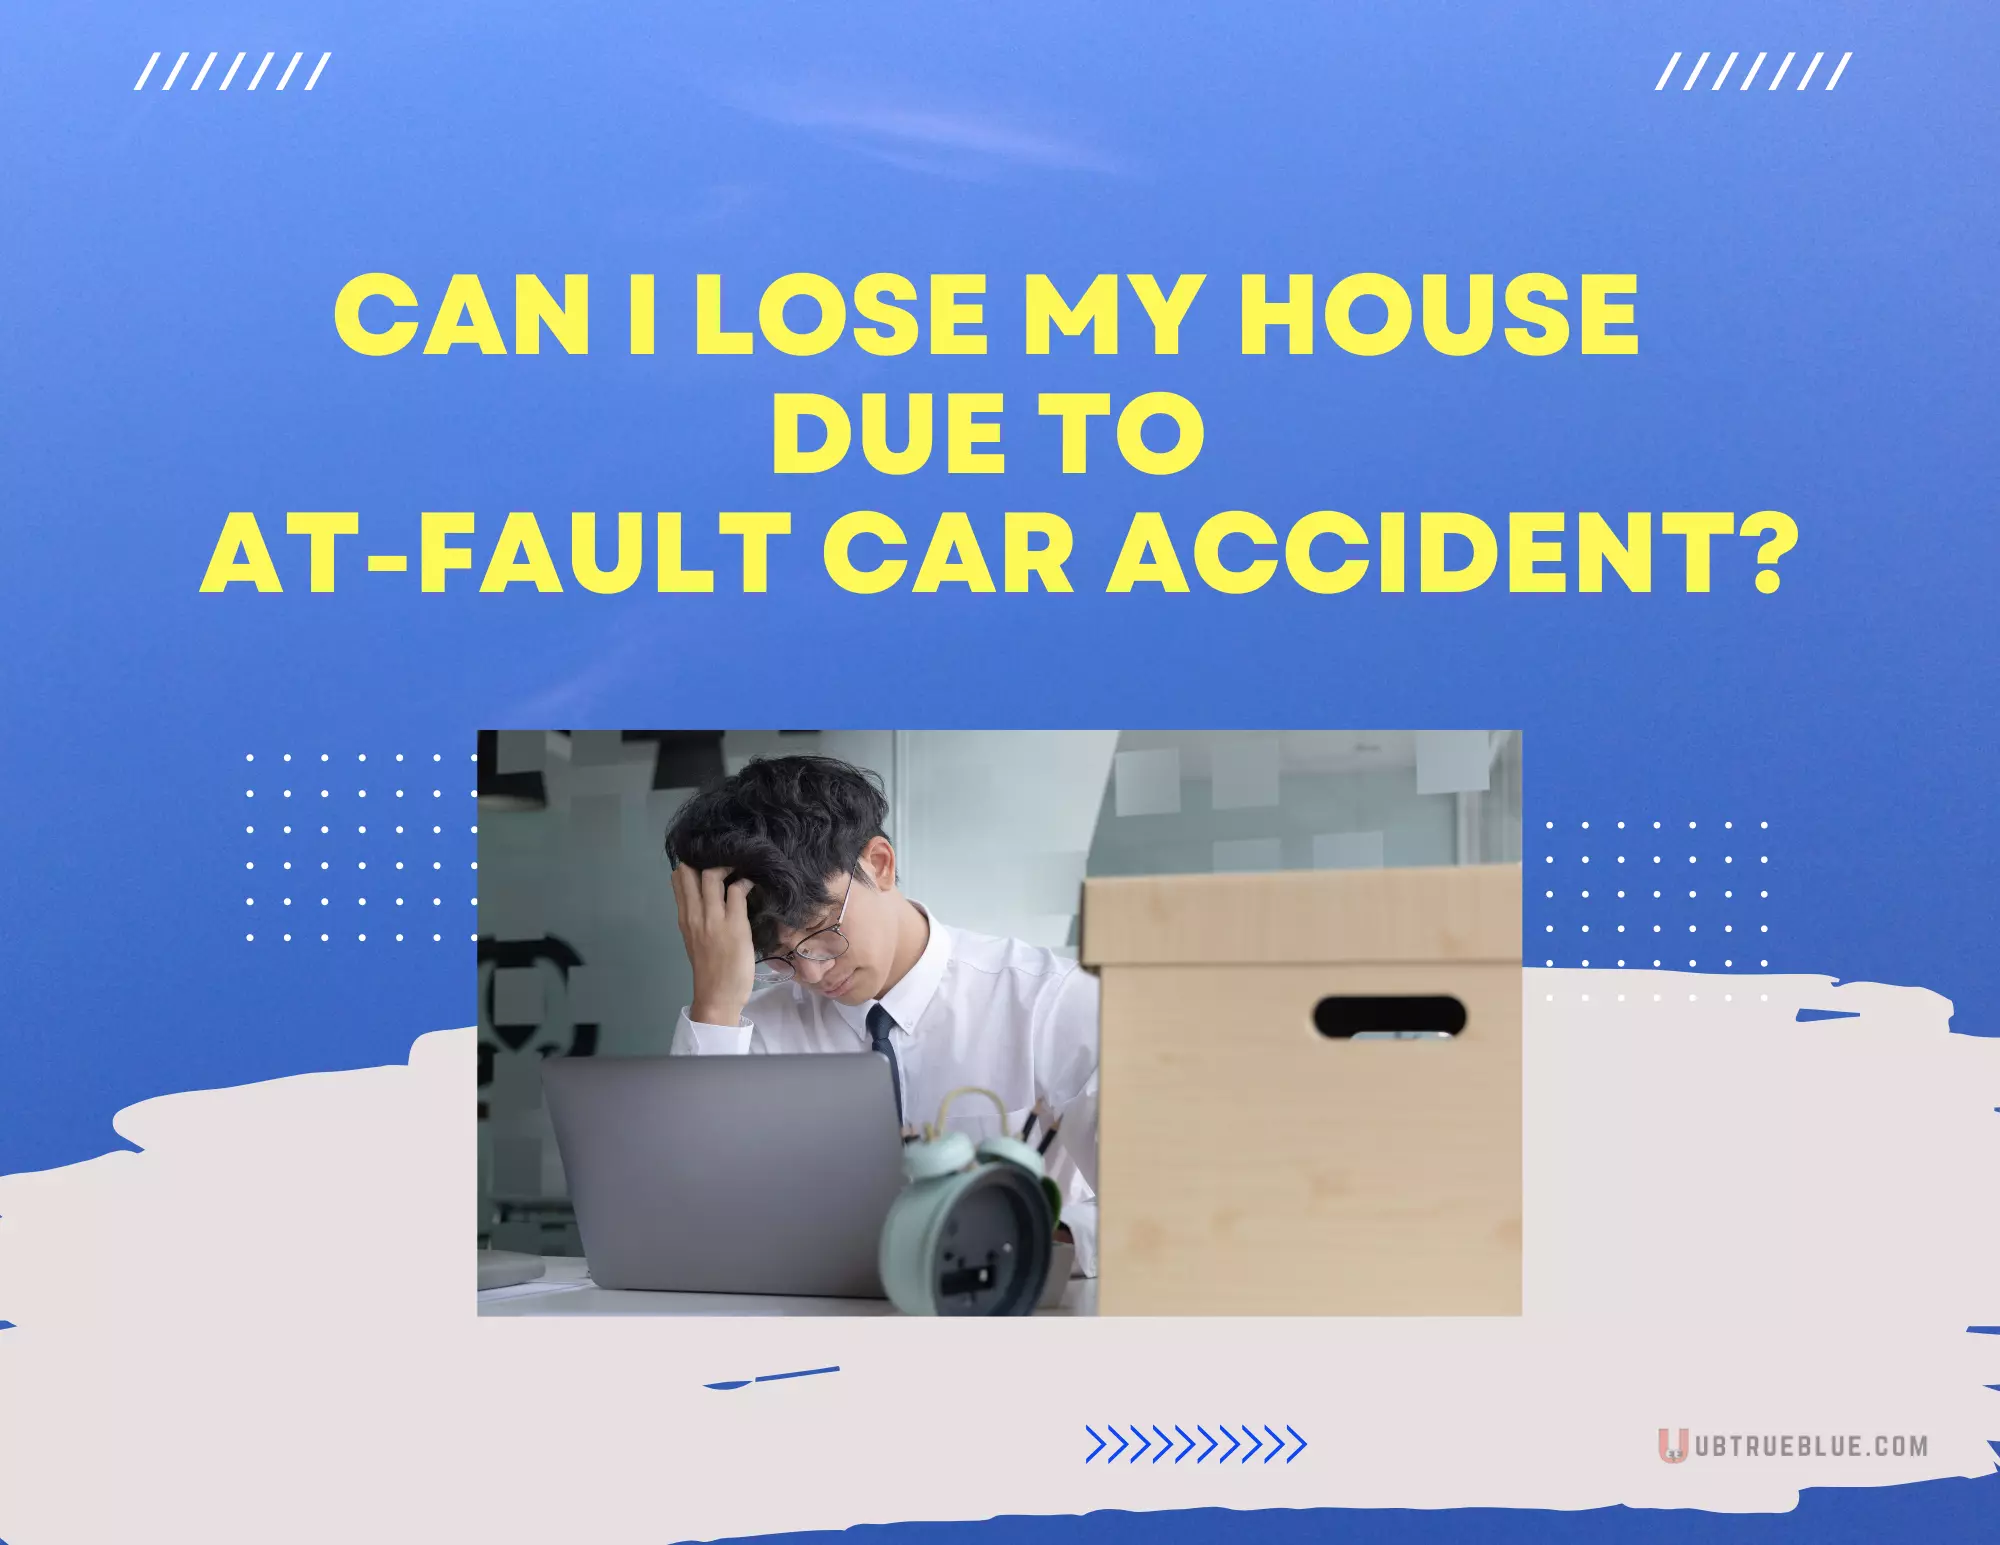 Can I Lose My House Due To At Fault Car Accident On Ubtrueblue Automotive At-Fault Accident? Property Damage Mortgage Homeownership Liability Insurance  Full